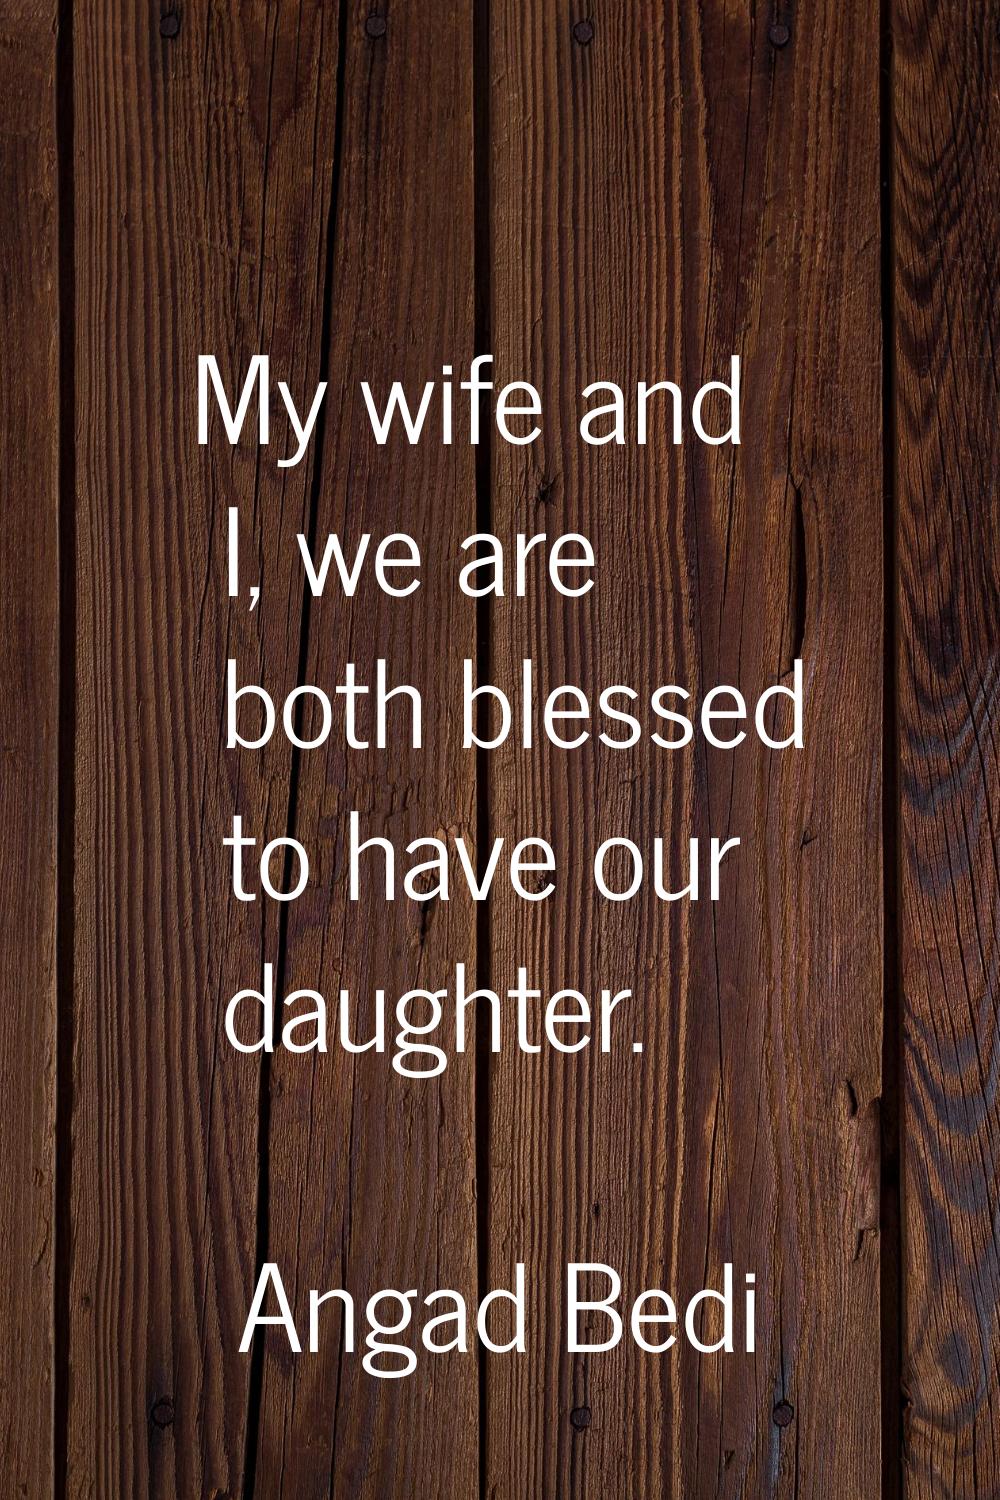 My wife and I, we are both blessed to have our daughter.